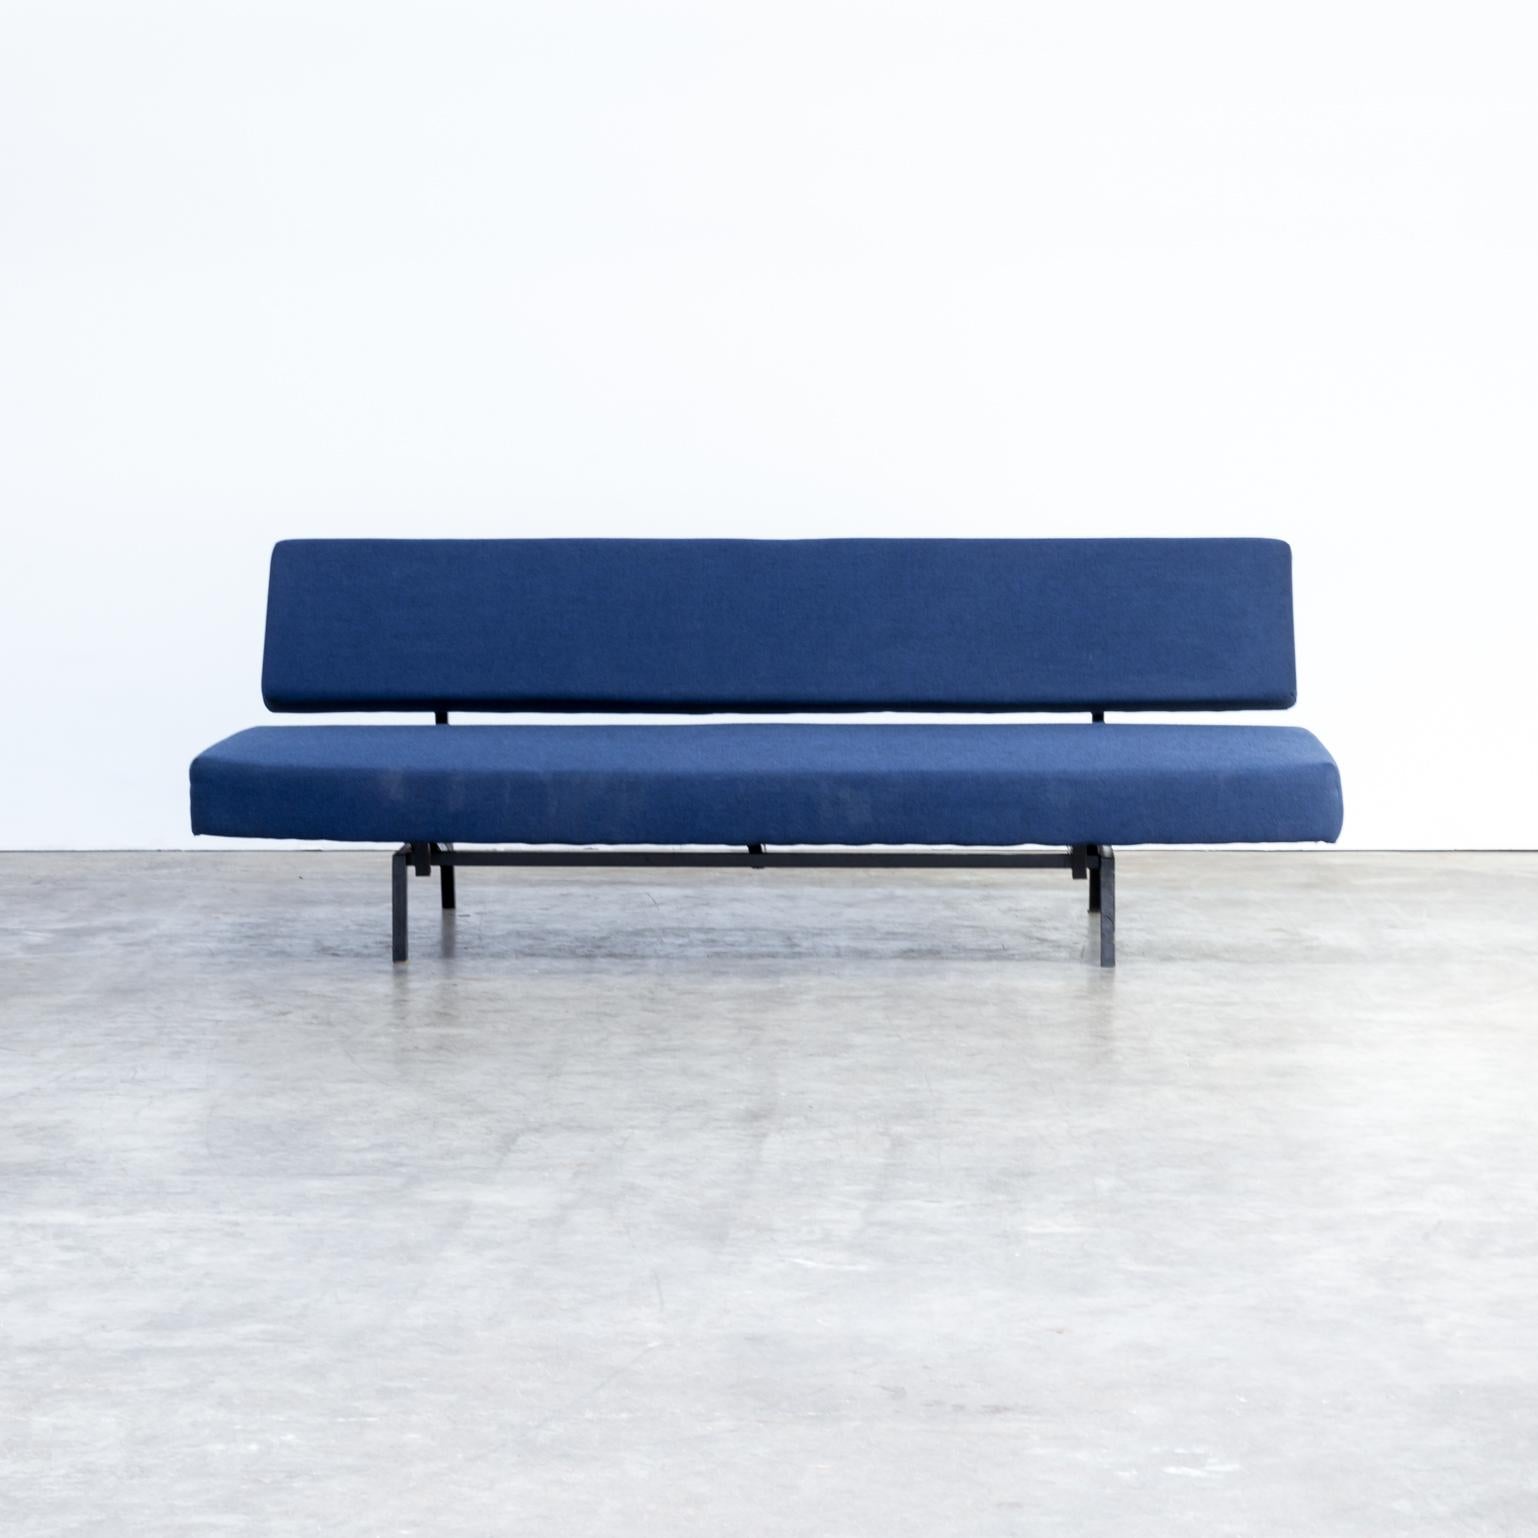 1960s Martin Visser sofa / daybed ‘BR03' for ’t Spectrum. Good condition, fabric very good reupholstered.